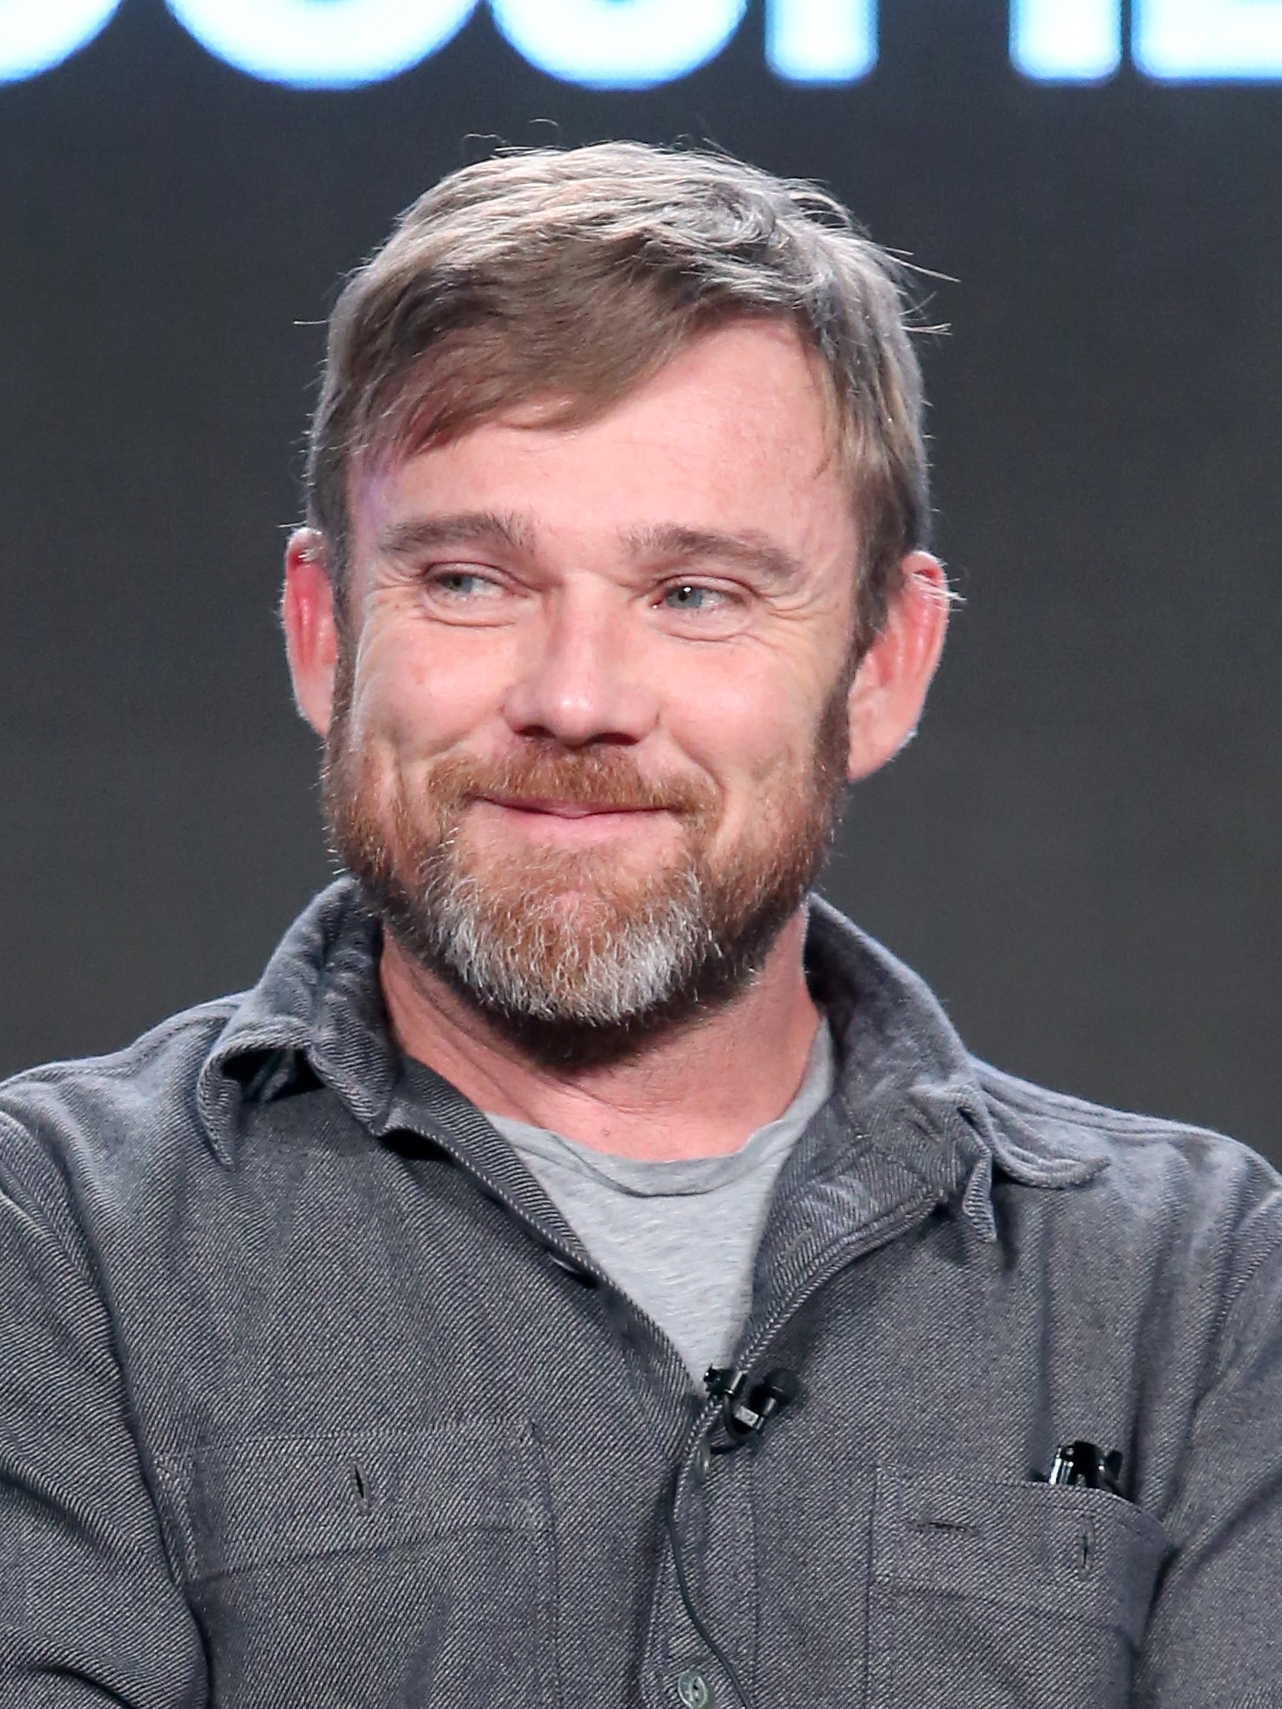 Ricky Schroder wearing a gray polo